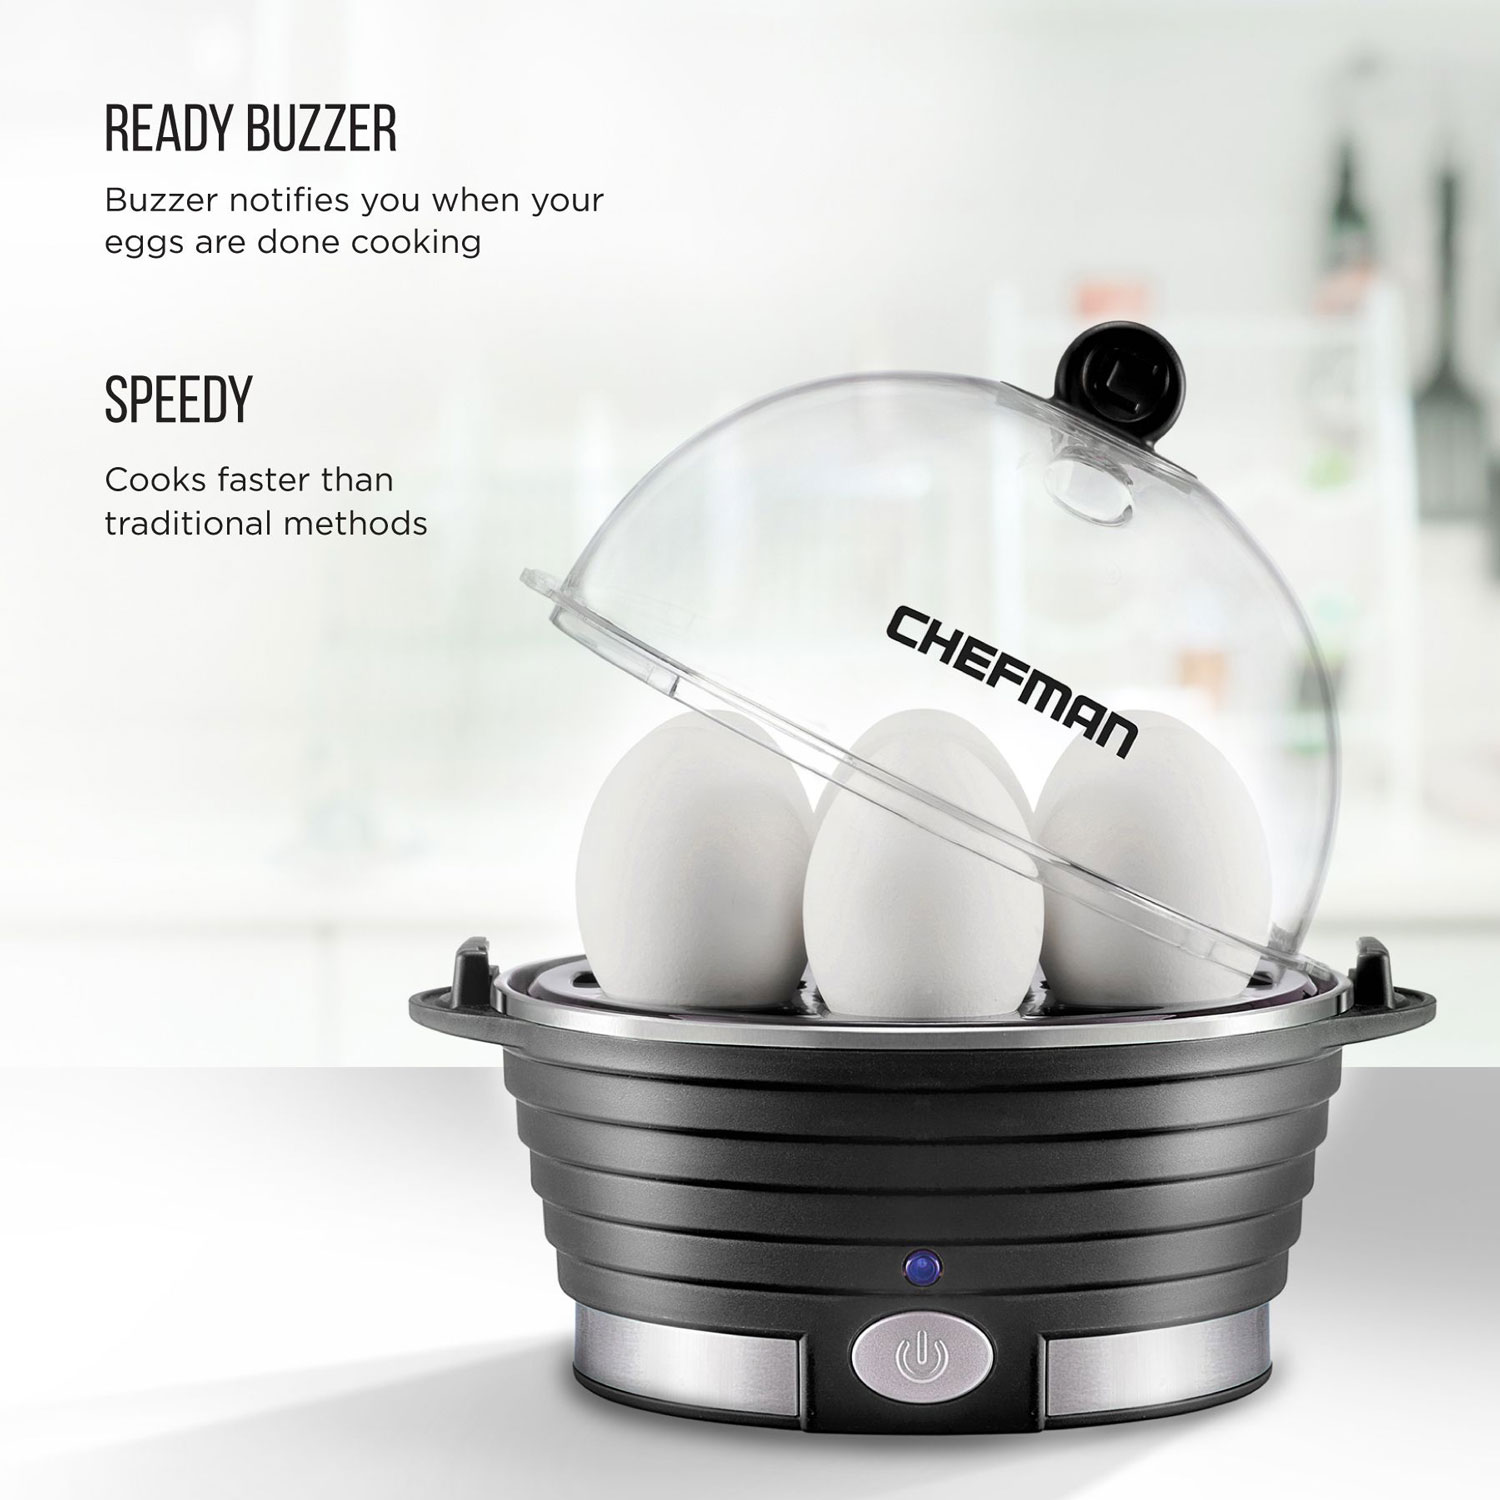 Top Quality Multifunction Poach Boil Electric Egg Cooker Boiler Steamer Automatic Safe Power-Off Cooking Tools Kitchen